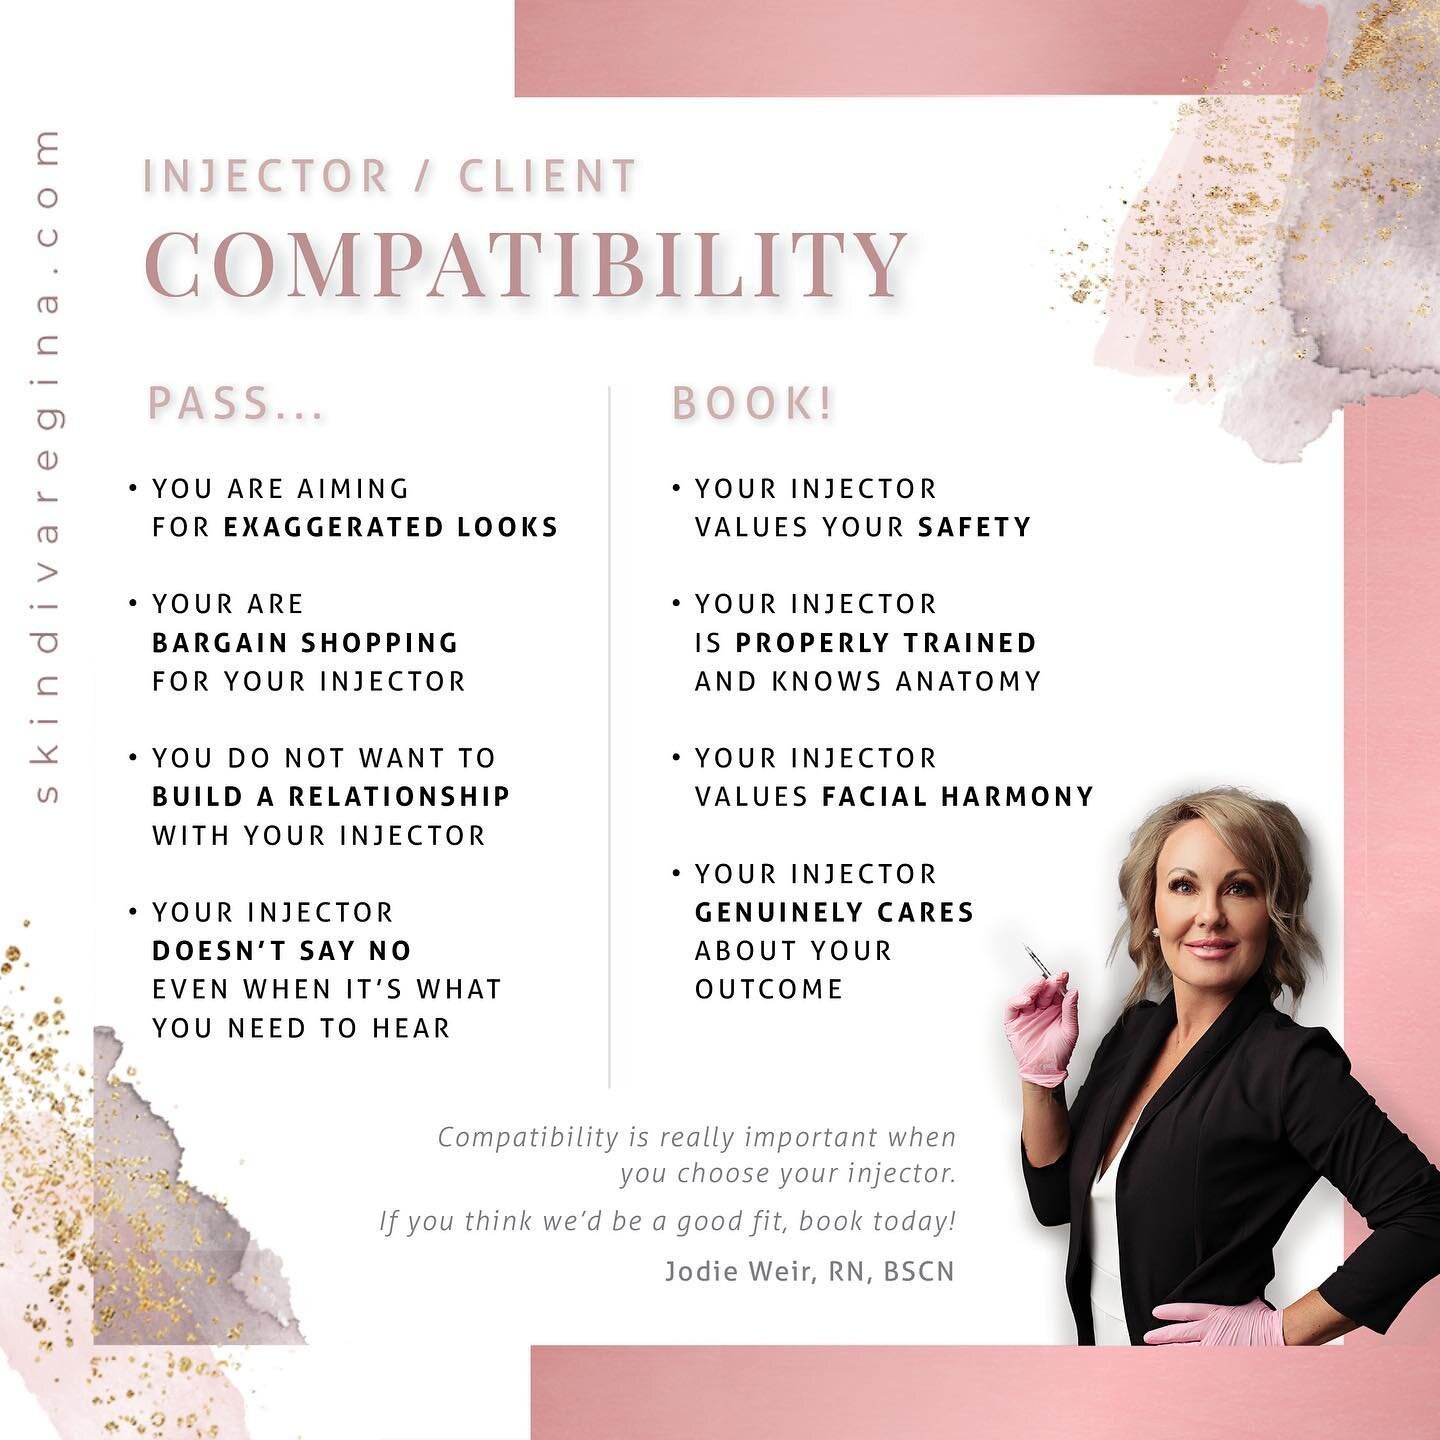 Are we going to be a good fit?

If you&rsquo;re looking for a nurse injector to help you reach these goals, these quick tips will help you decide if you should pass on a beauty injector, or book! We here at SkinDiva create a treatment plan based on y